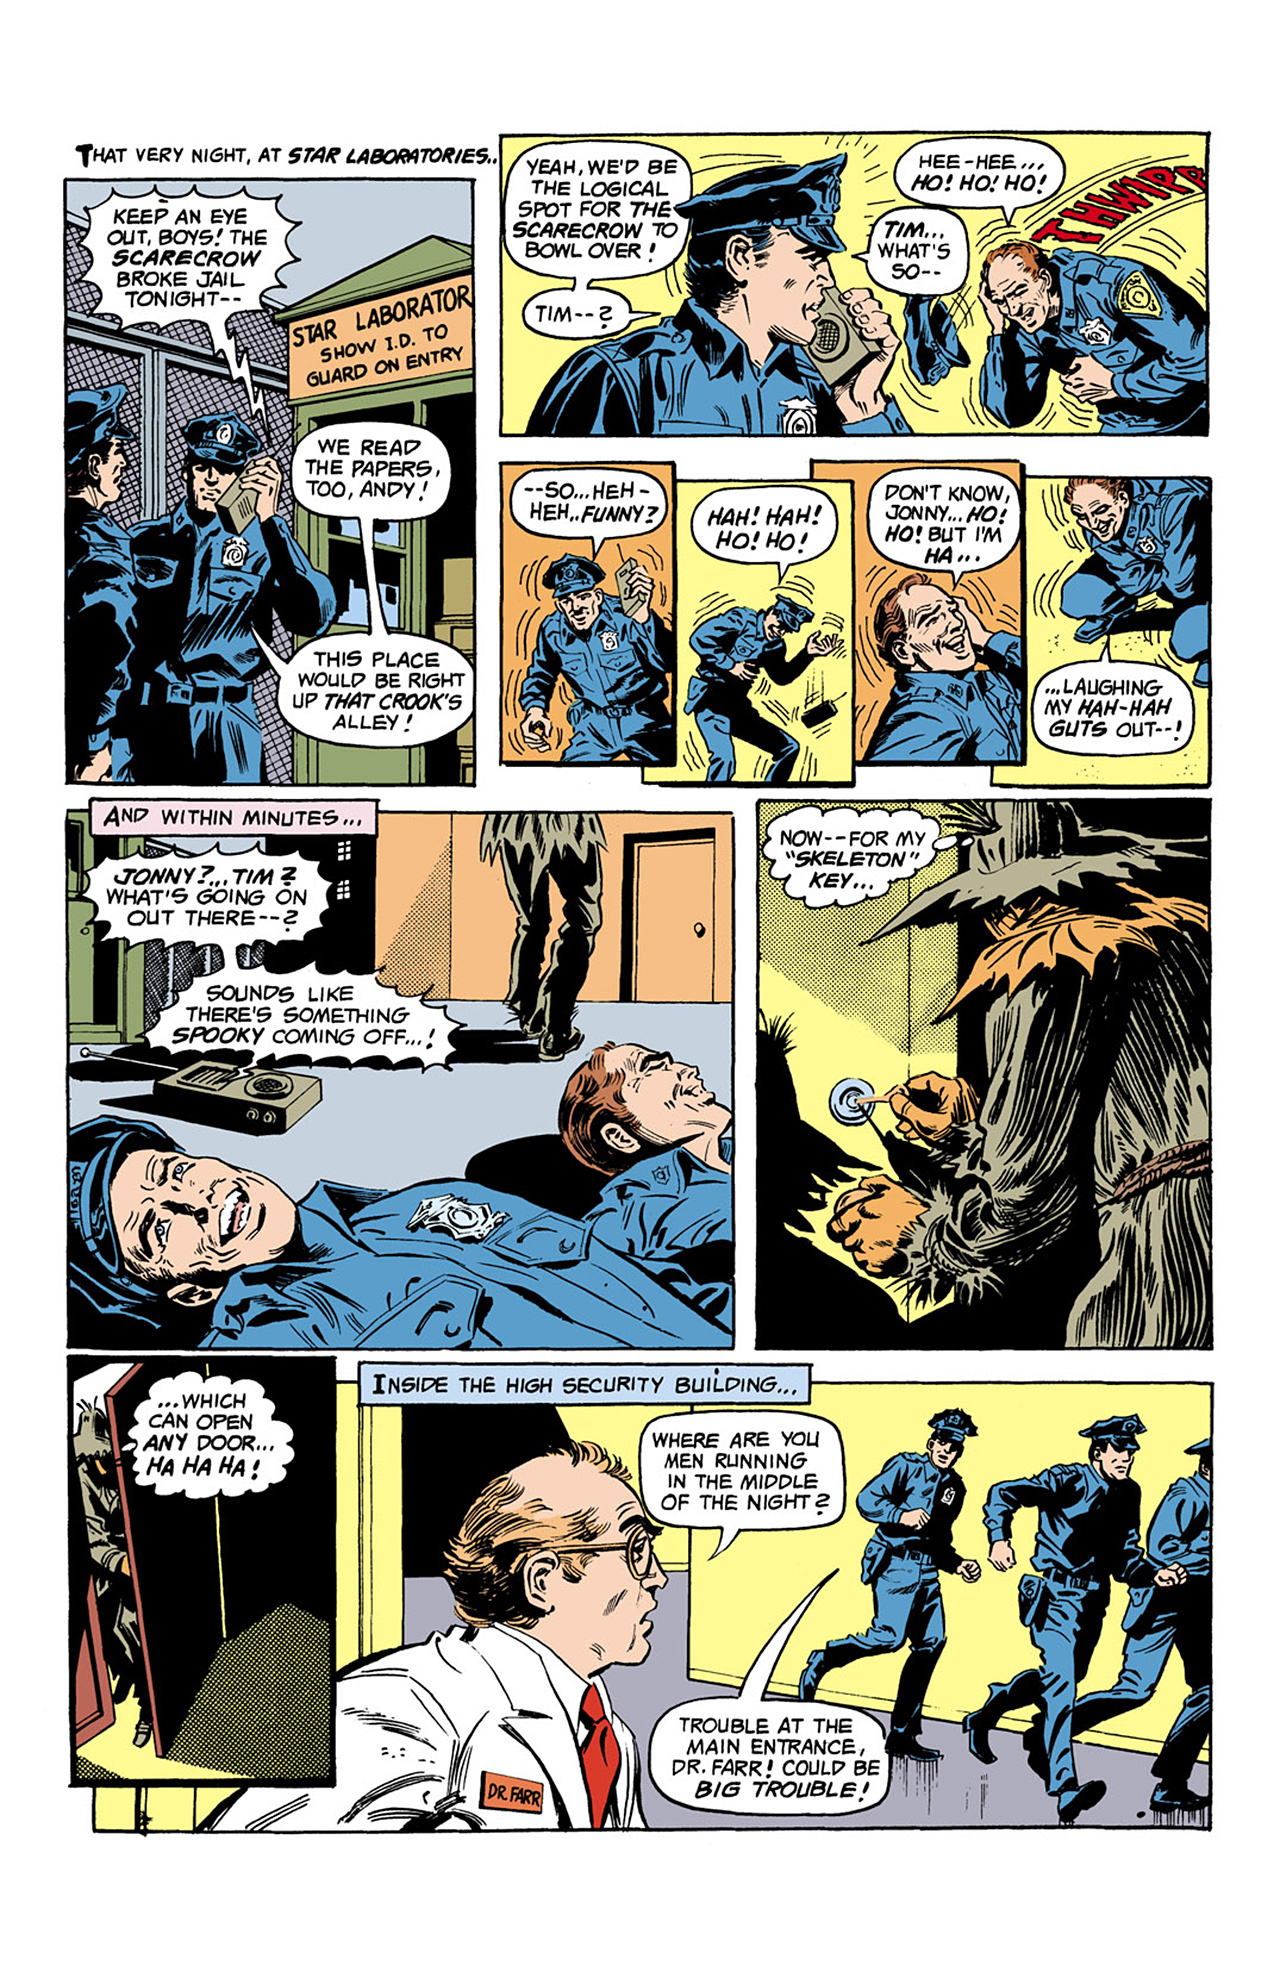 The Joker (1975-1976 + 2019): Chapter 8 - Page 4